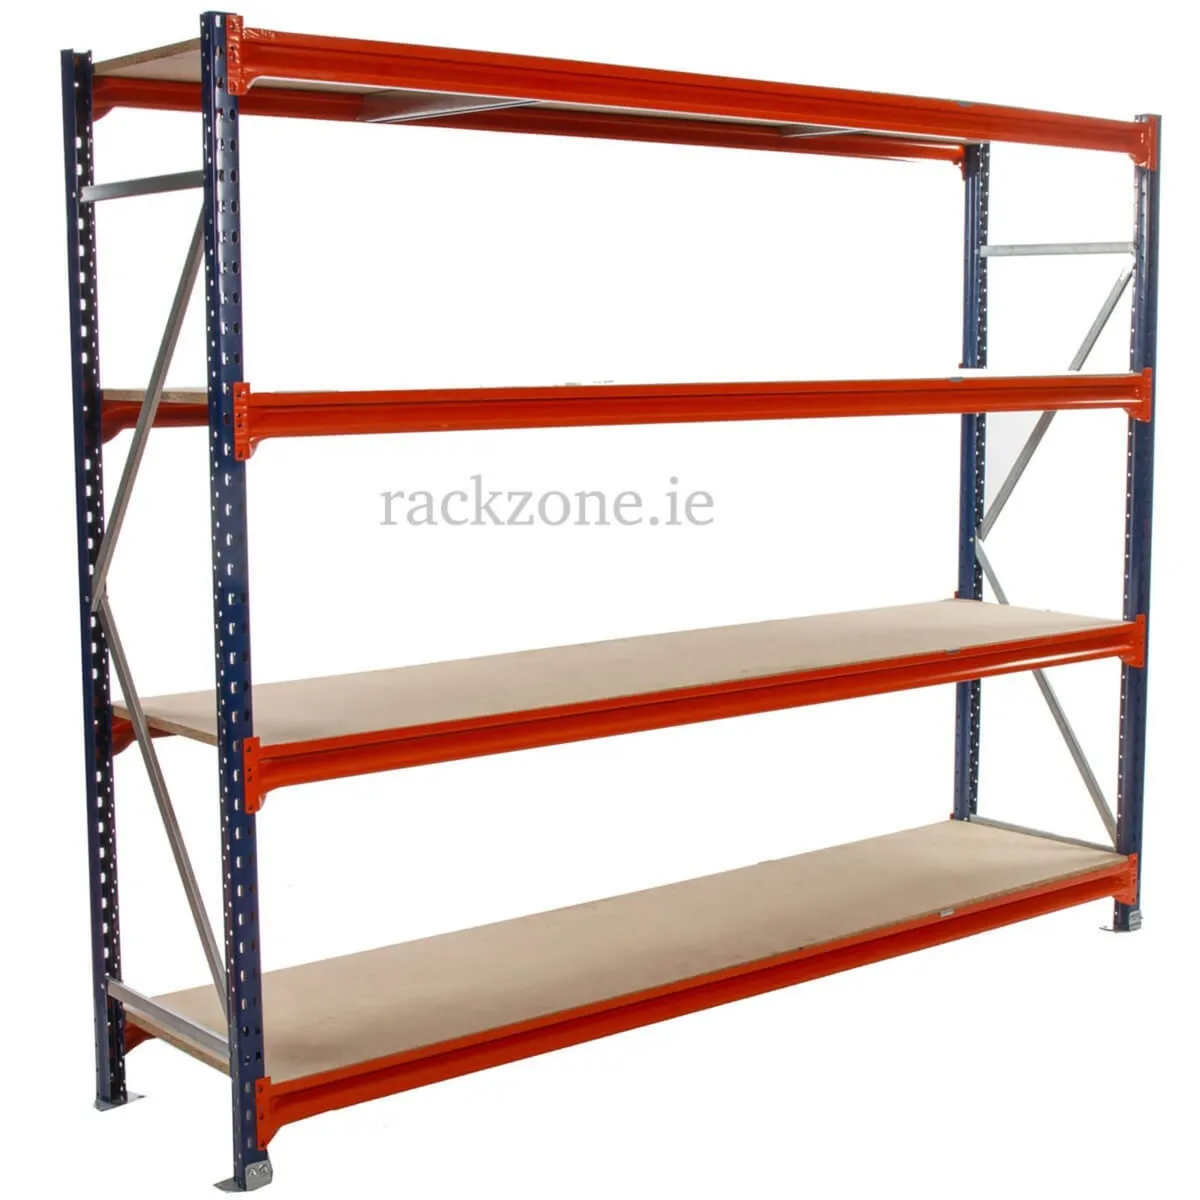 5 BAYS Shelving 2000x1800x800 FREE DELIVERY